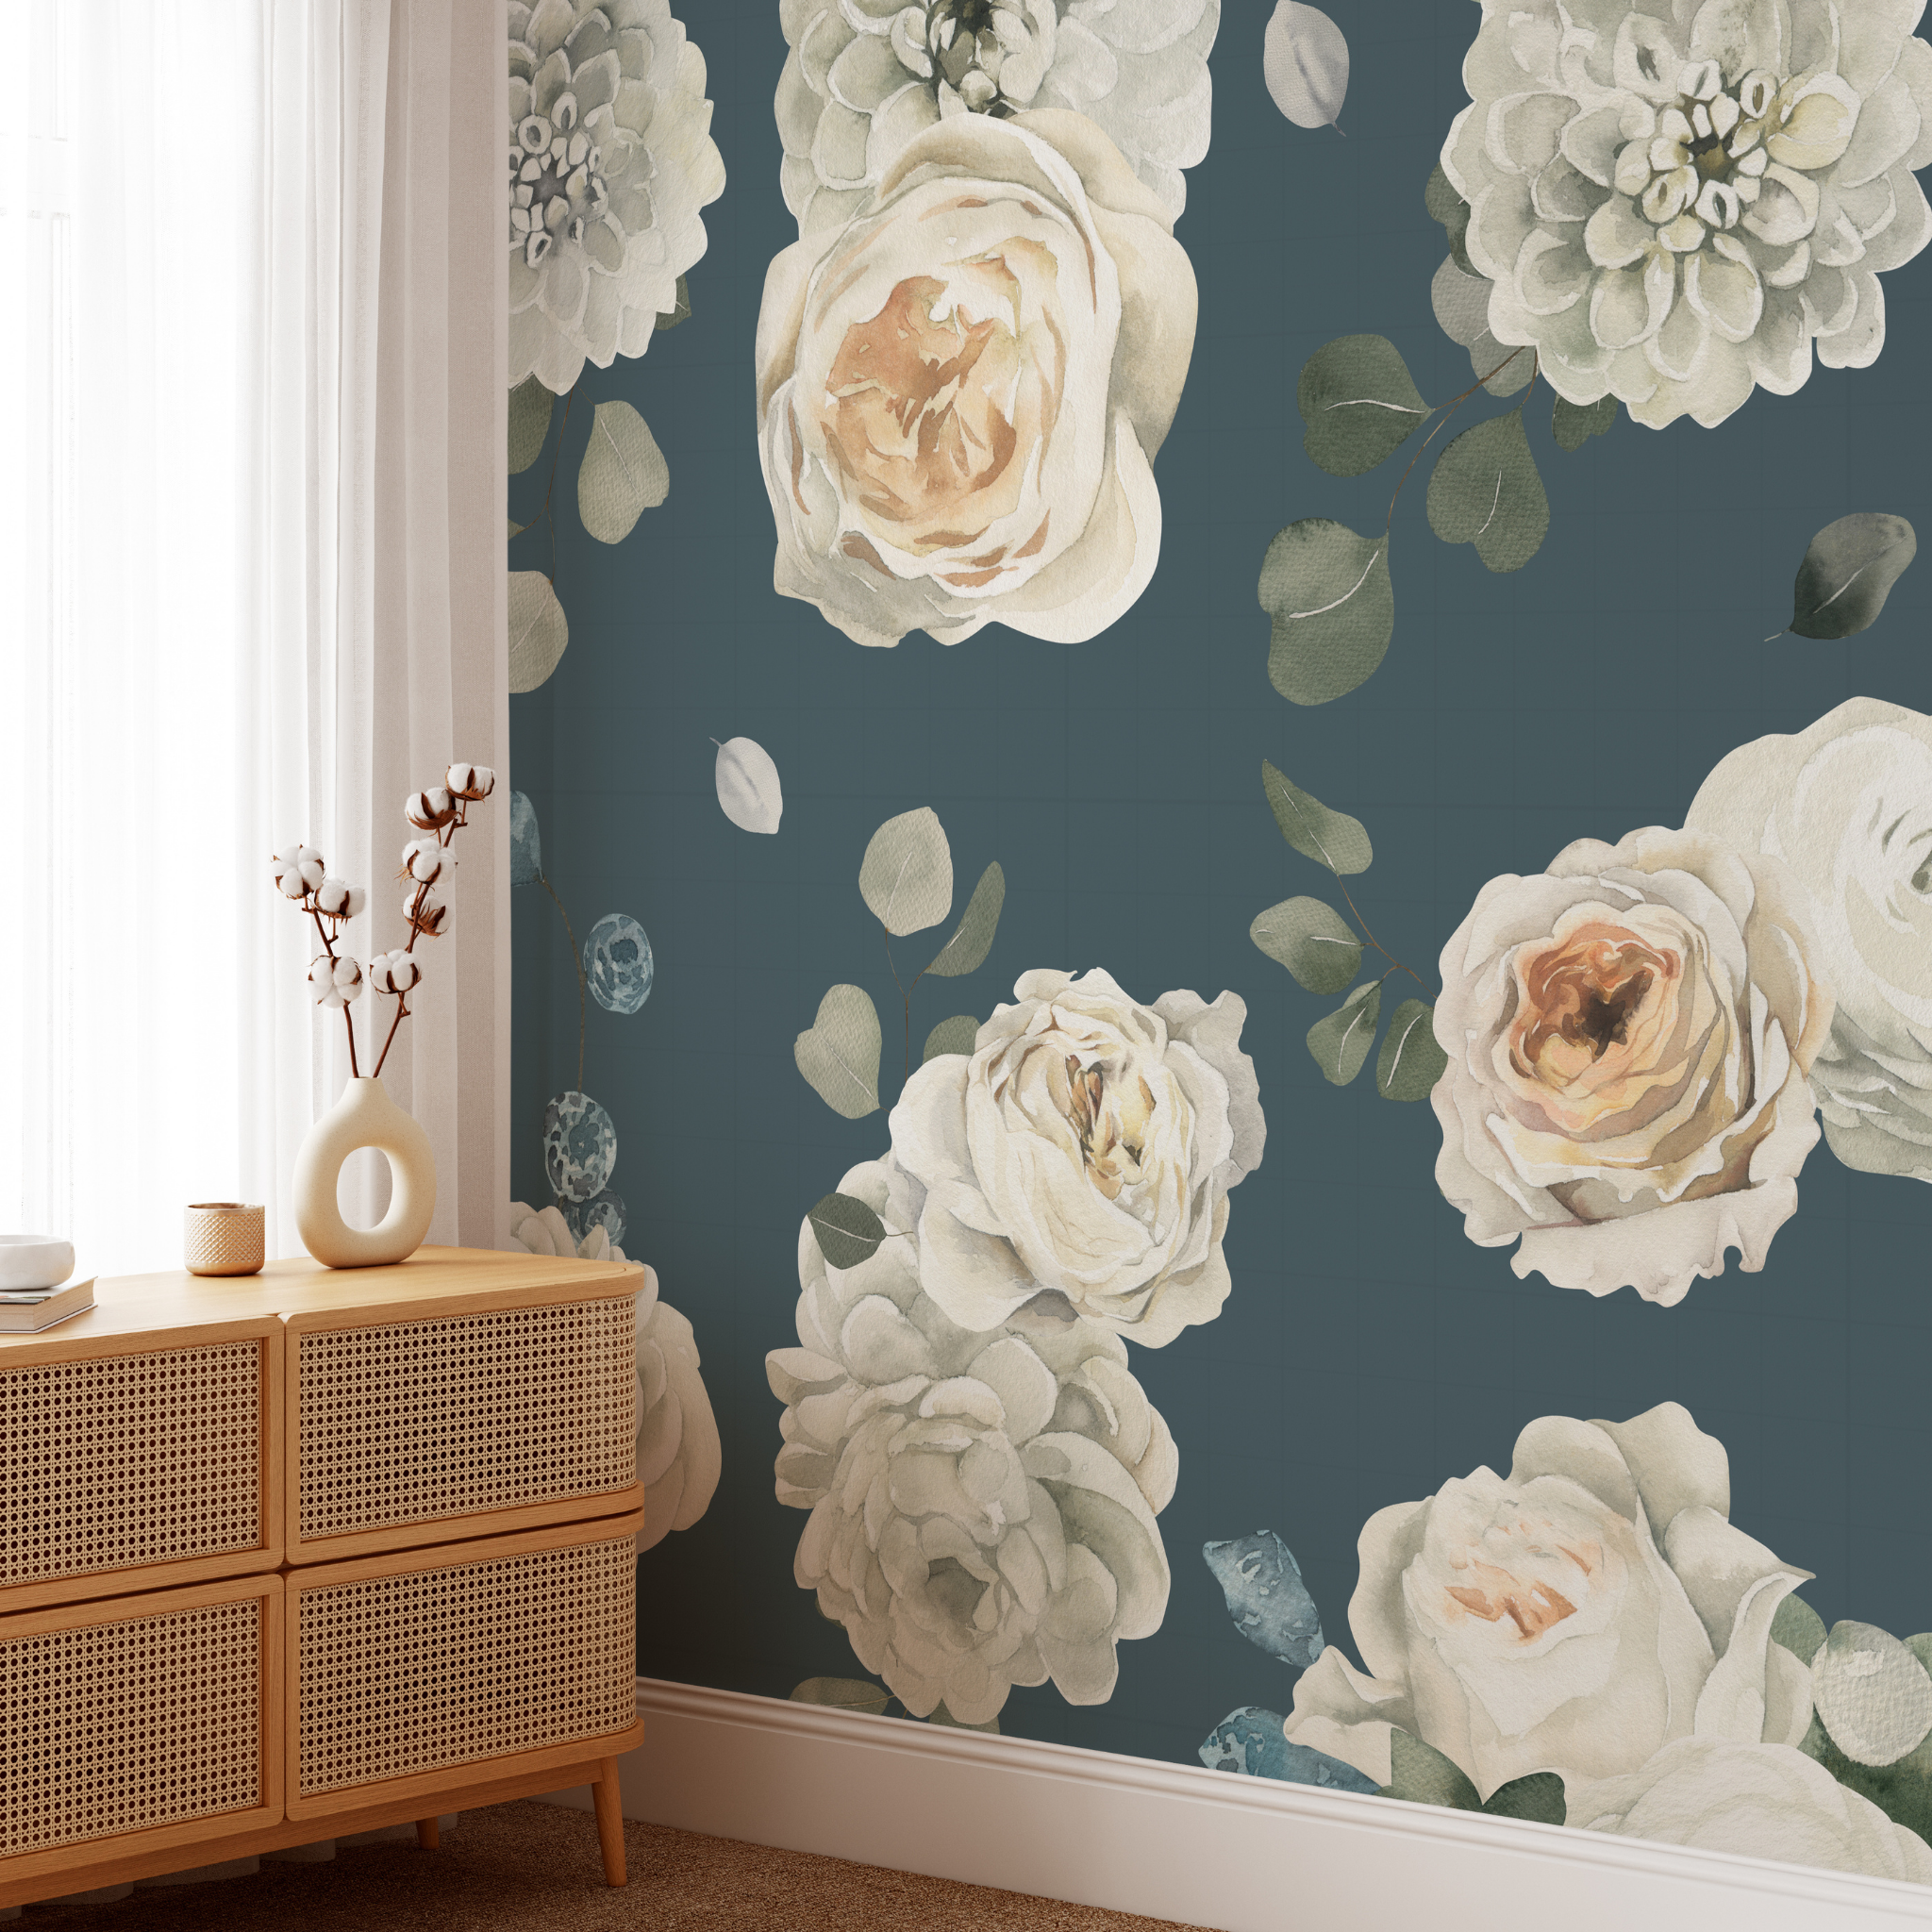 "Wall Blush's Forget Me Not Wallpaper featured in a stylish living room, highlighting floral elegance."